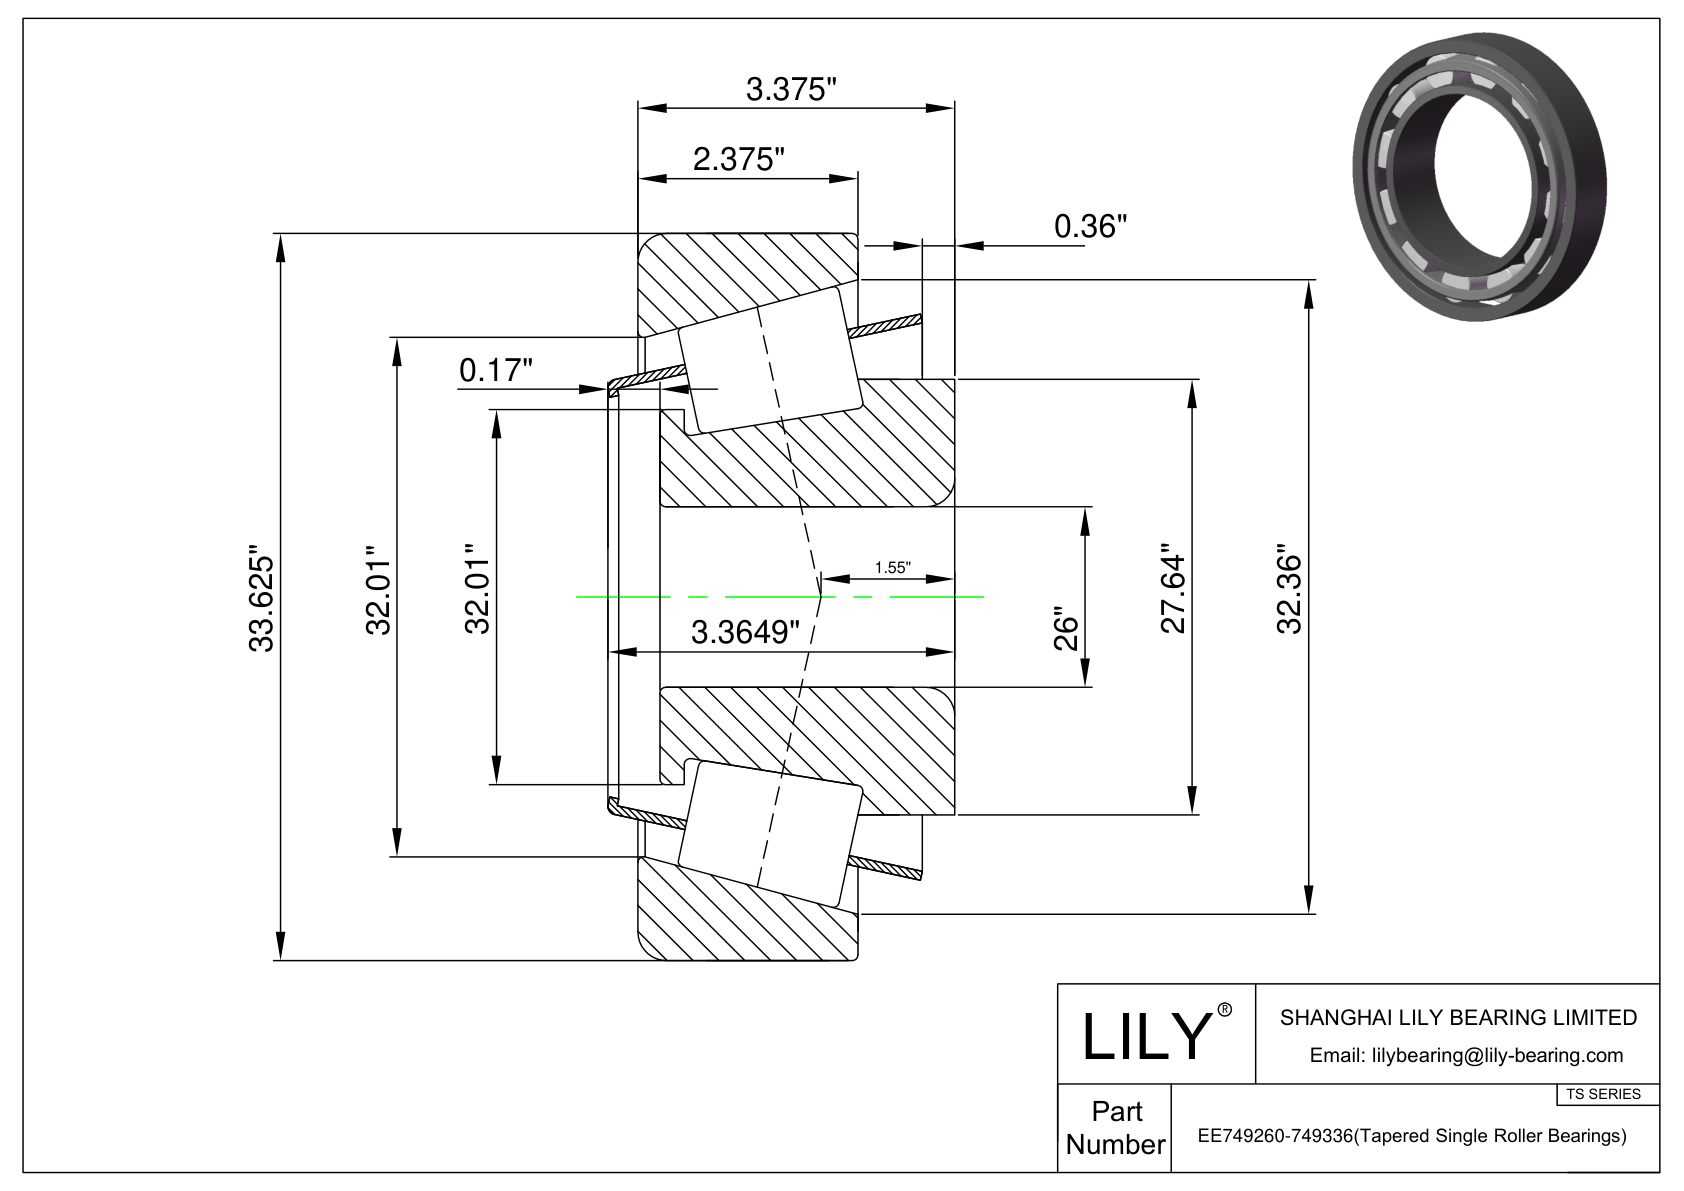 EE749260-749336 TS (Tapered Single Roller Bearings) (Imperial) cad drawing